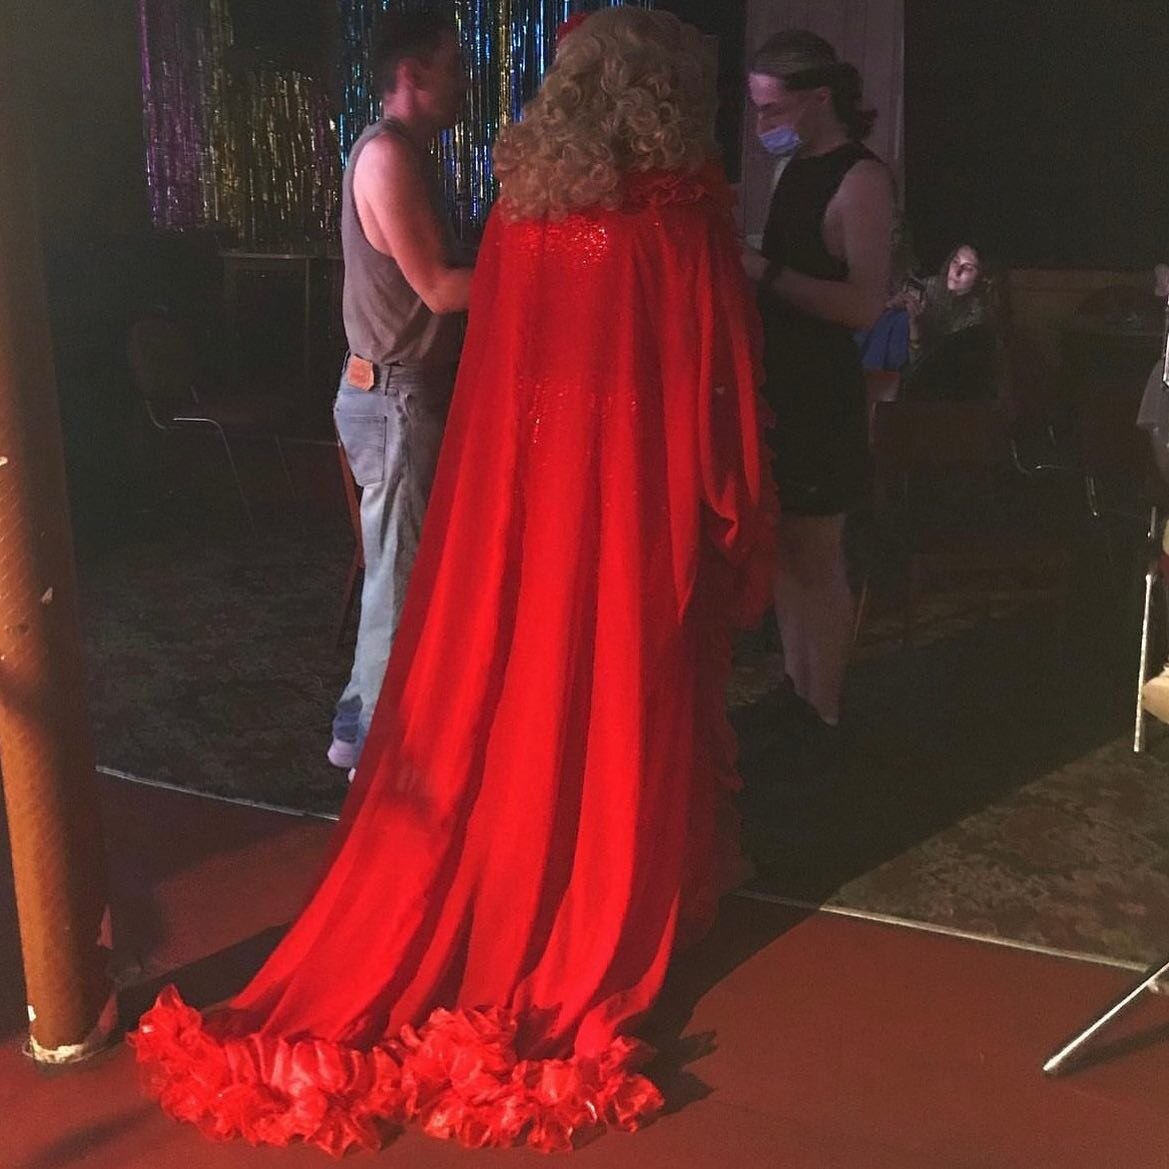 Another shot of the red chiffon frilly gown I made for @making_up_short_film ❤️ 

Did you know @making_up_short_film has been made part of official selection for the @melbqueerfilmfest and more! ✨
Including: @eastlondonlgbtqfilmfestival @soholondonfi